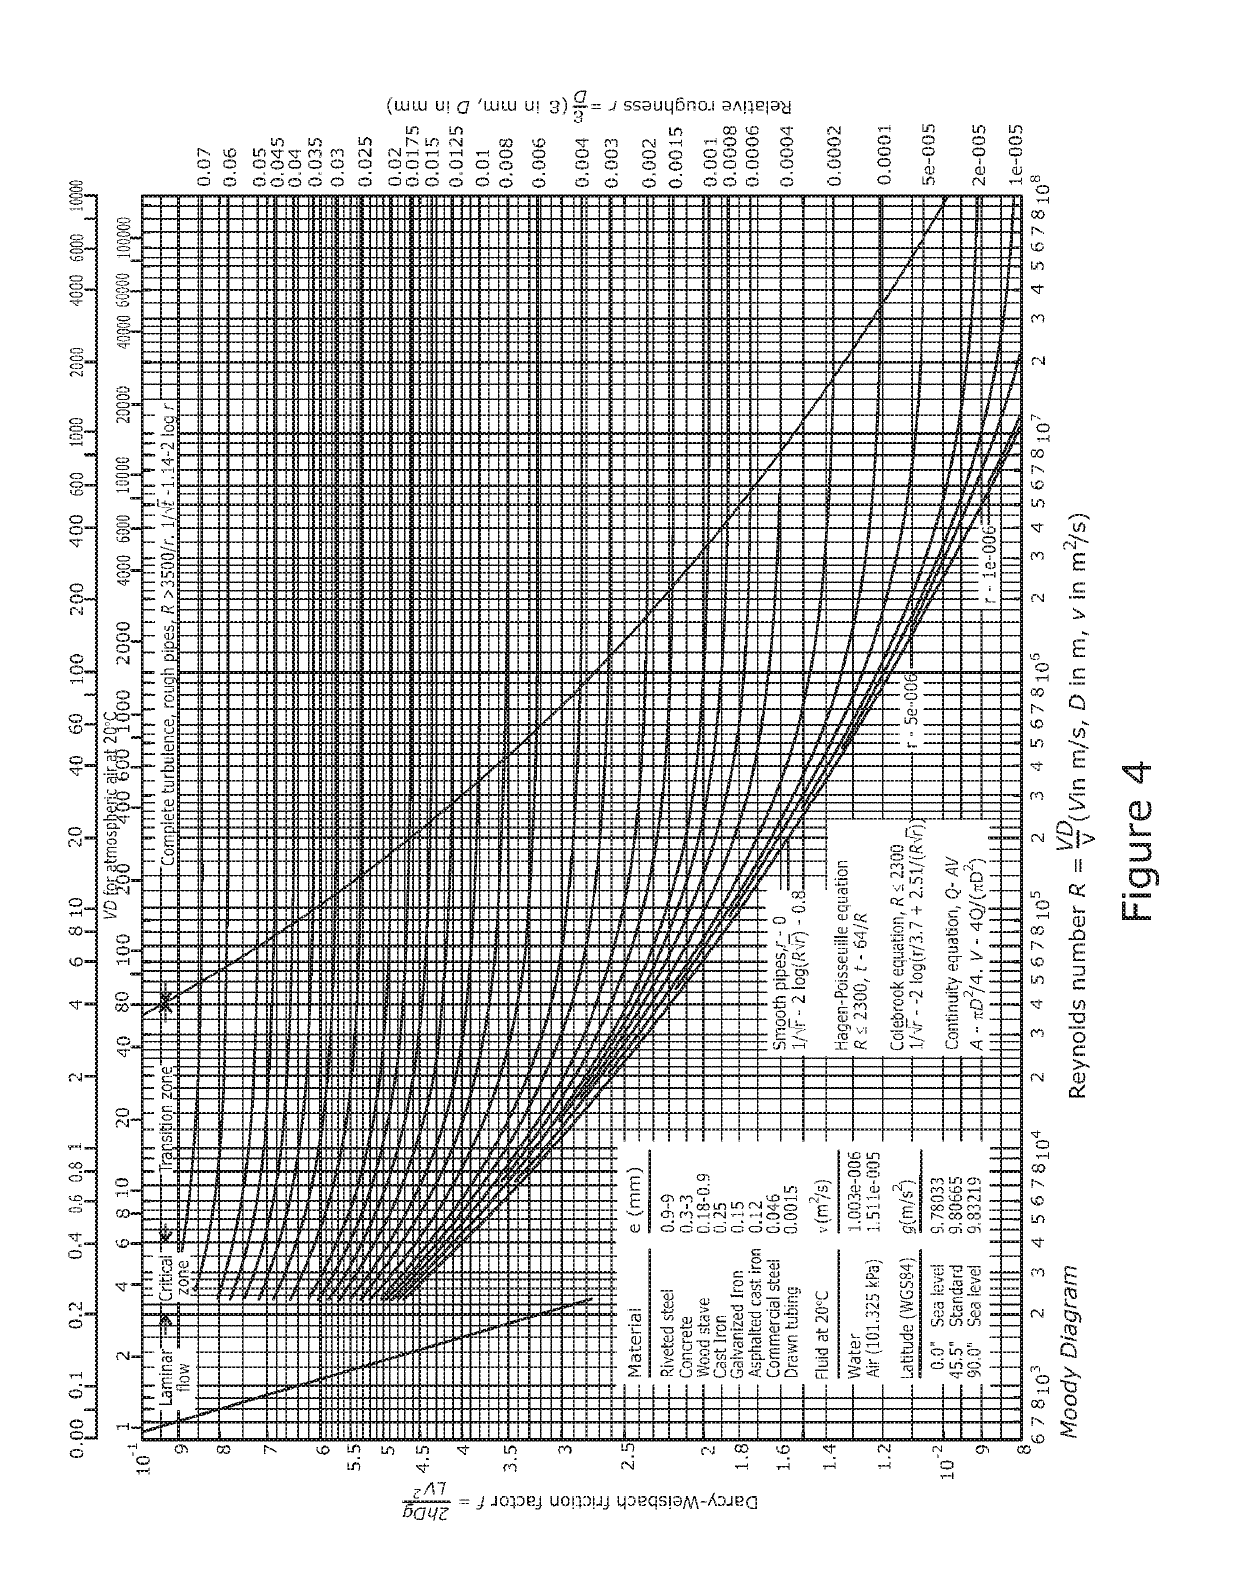 Improvements in or relating to the monitoring of fluid flow